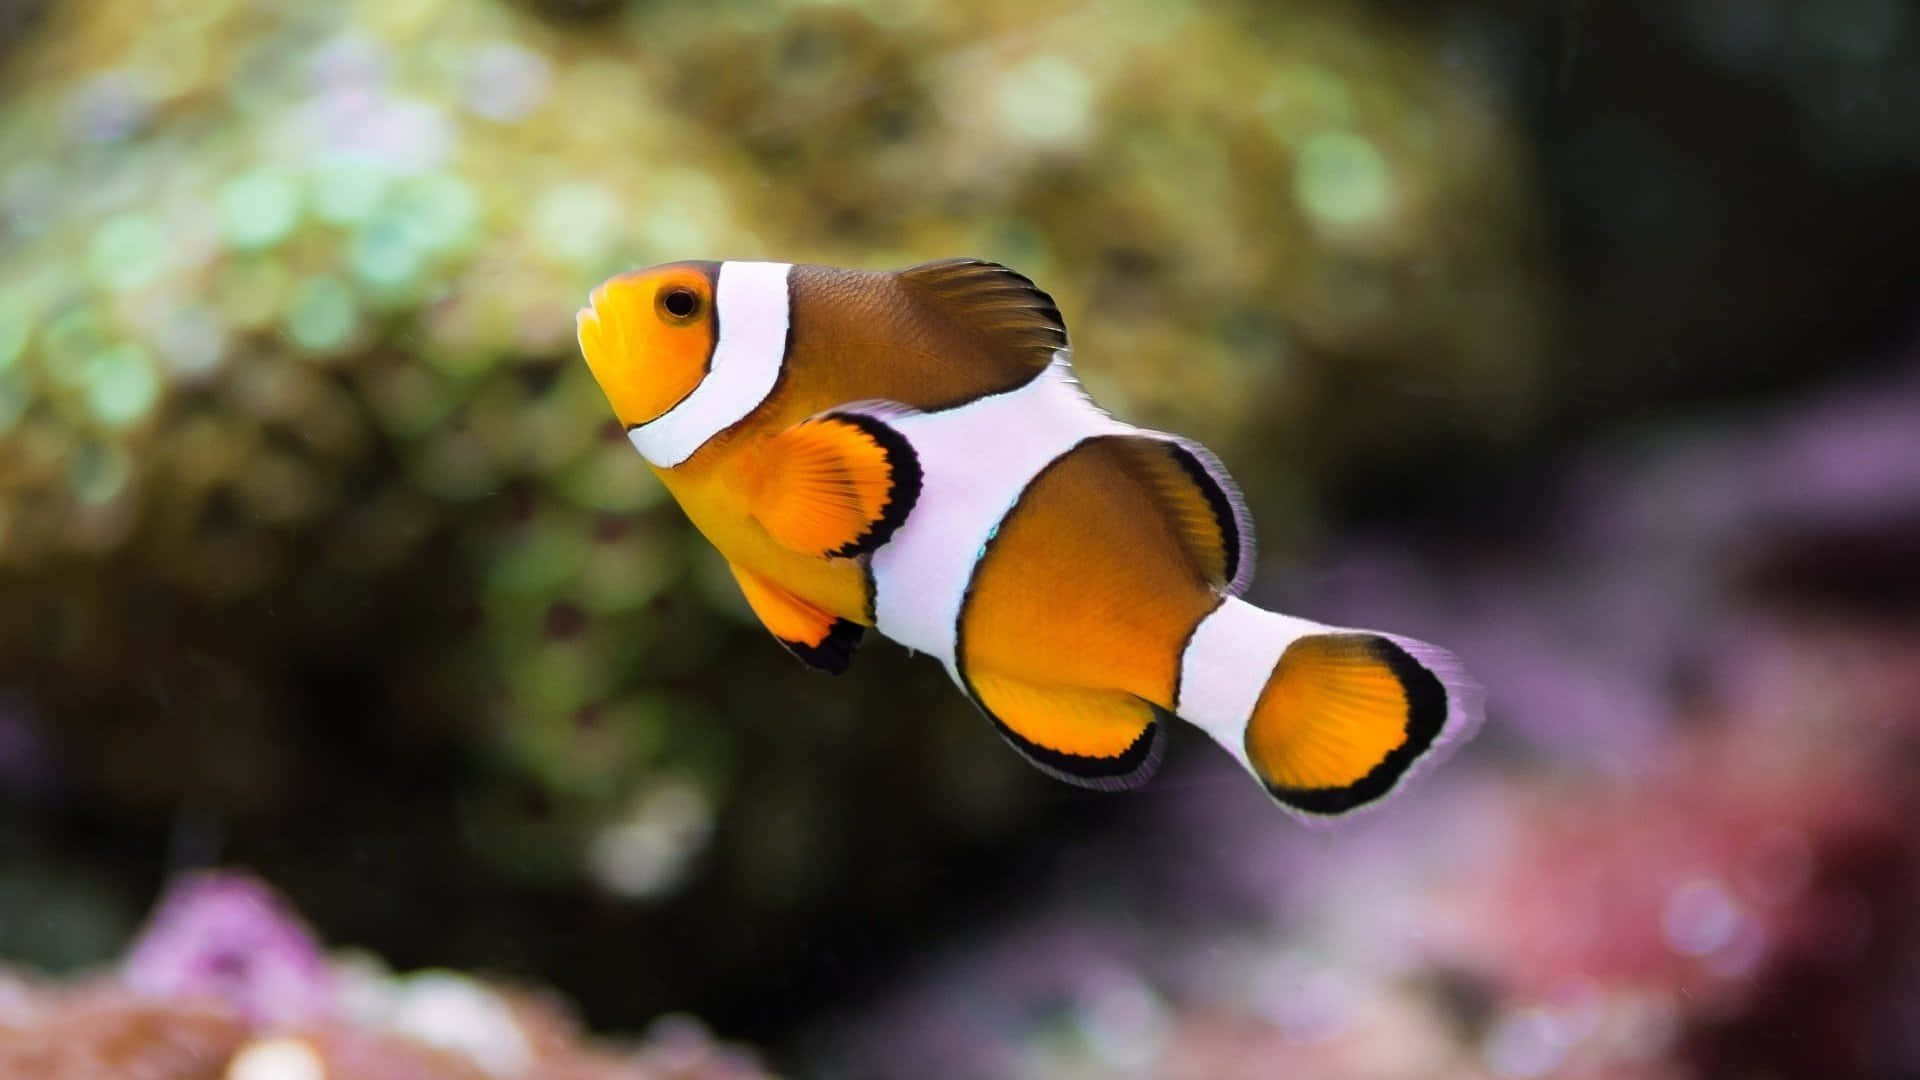 A Bright And Colorful Clownfish In Its Natural Habitat Wallpaper